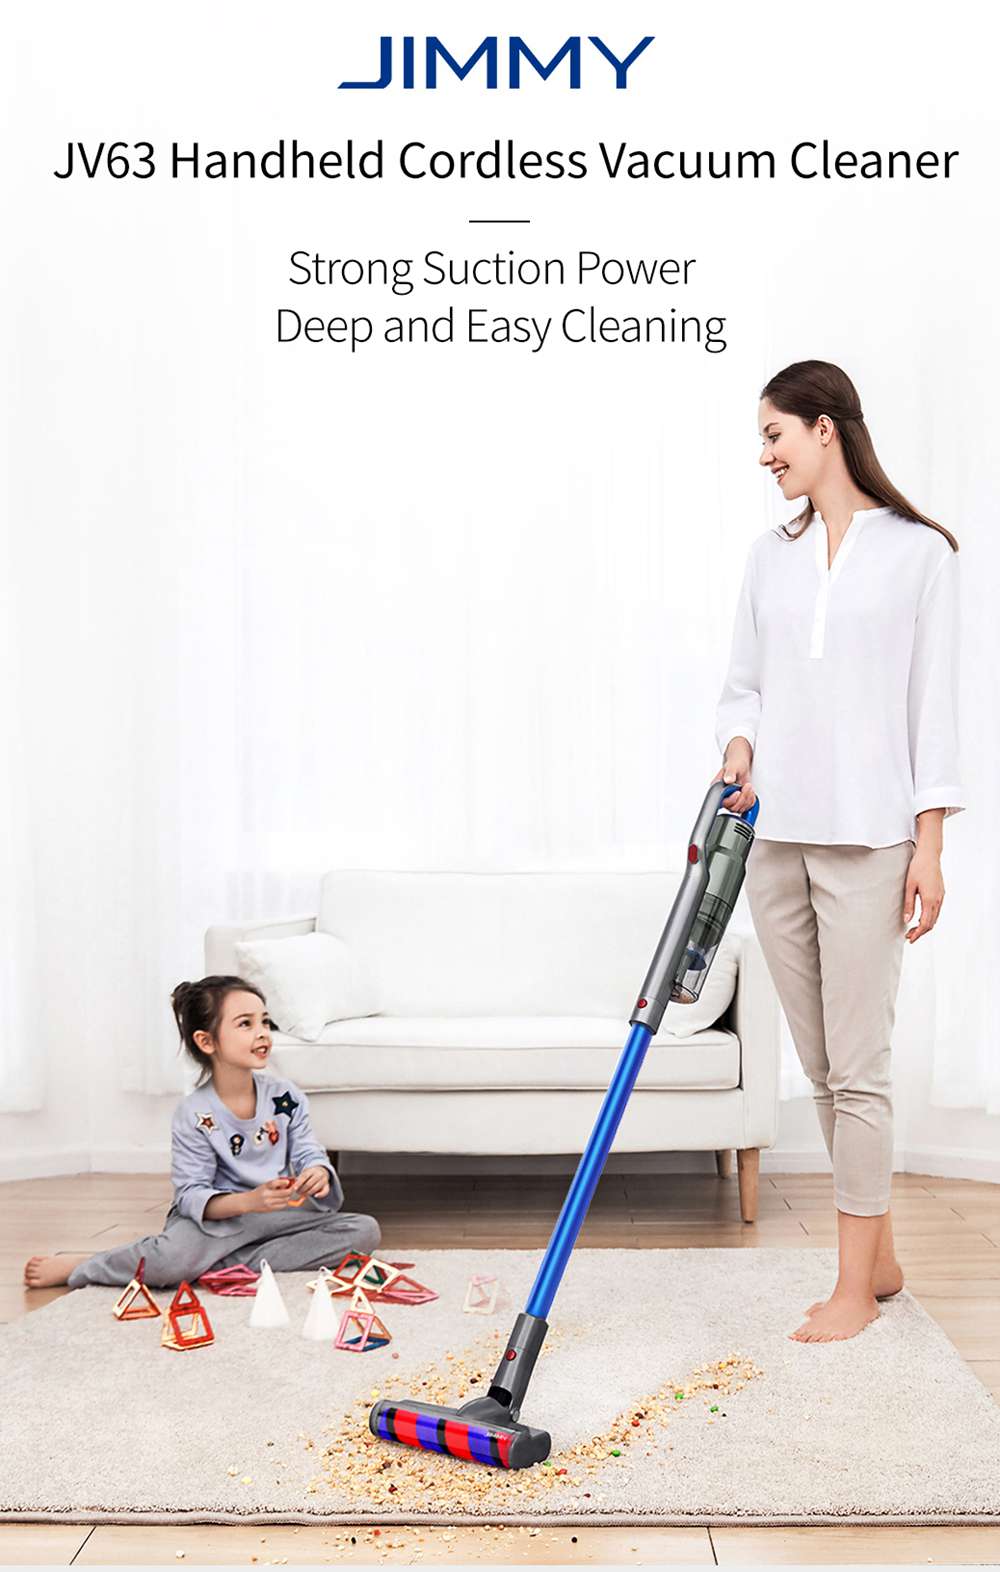 JIMMY JV63 Handheld Cordless Stick Vacuum Cleaner 130AW Suction Anti-winding Hair Mite 60 Min Runtime - Blue